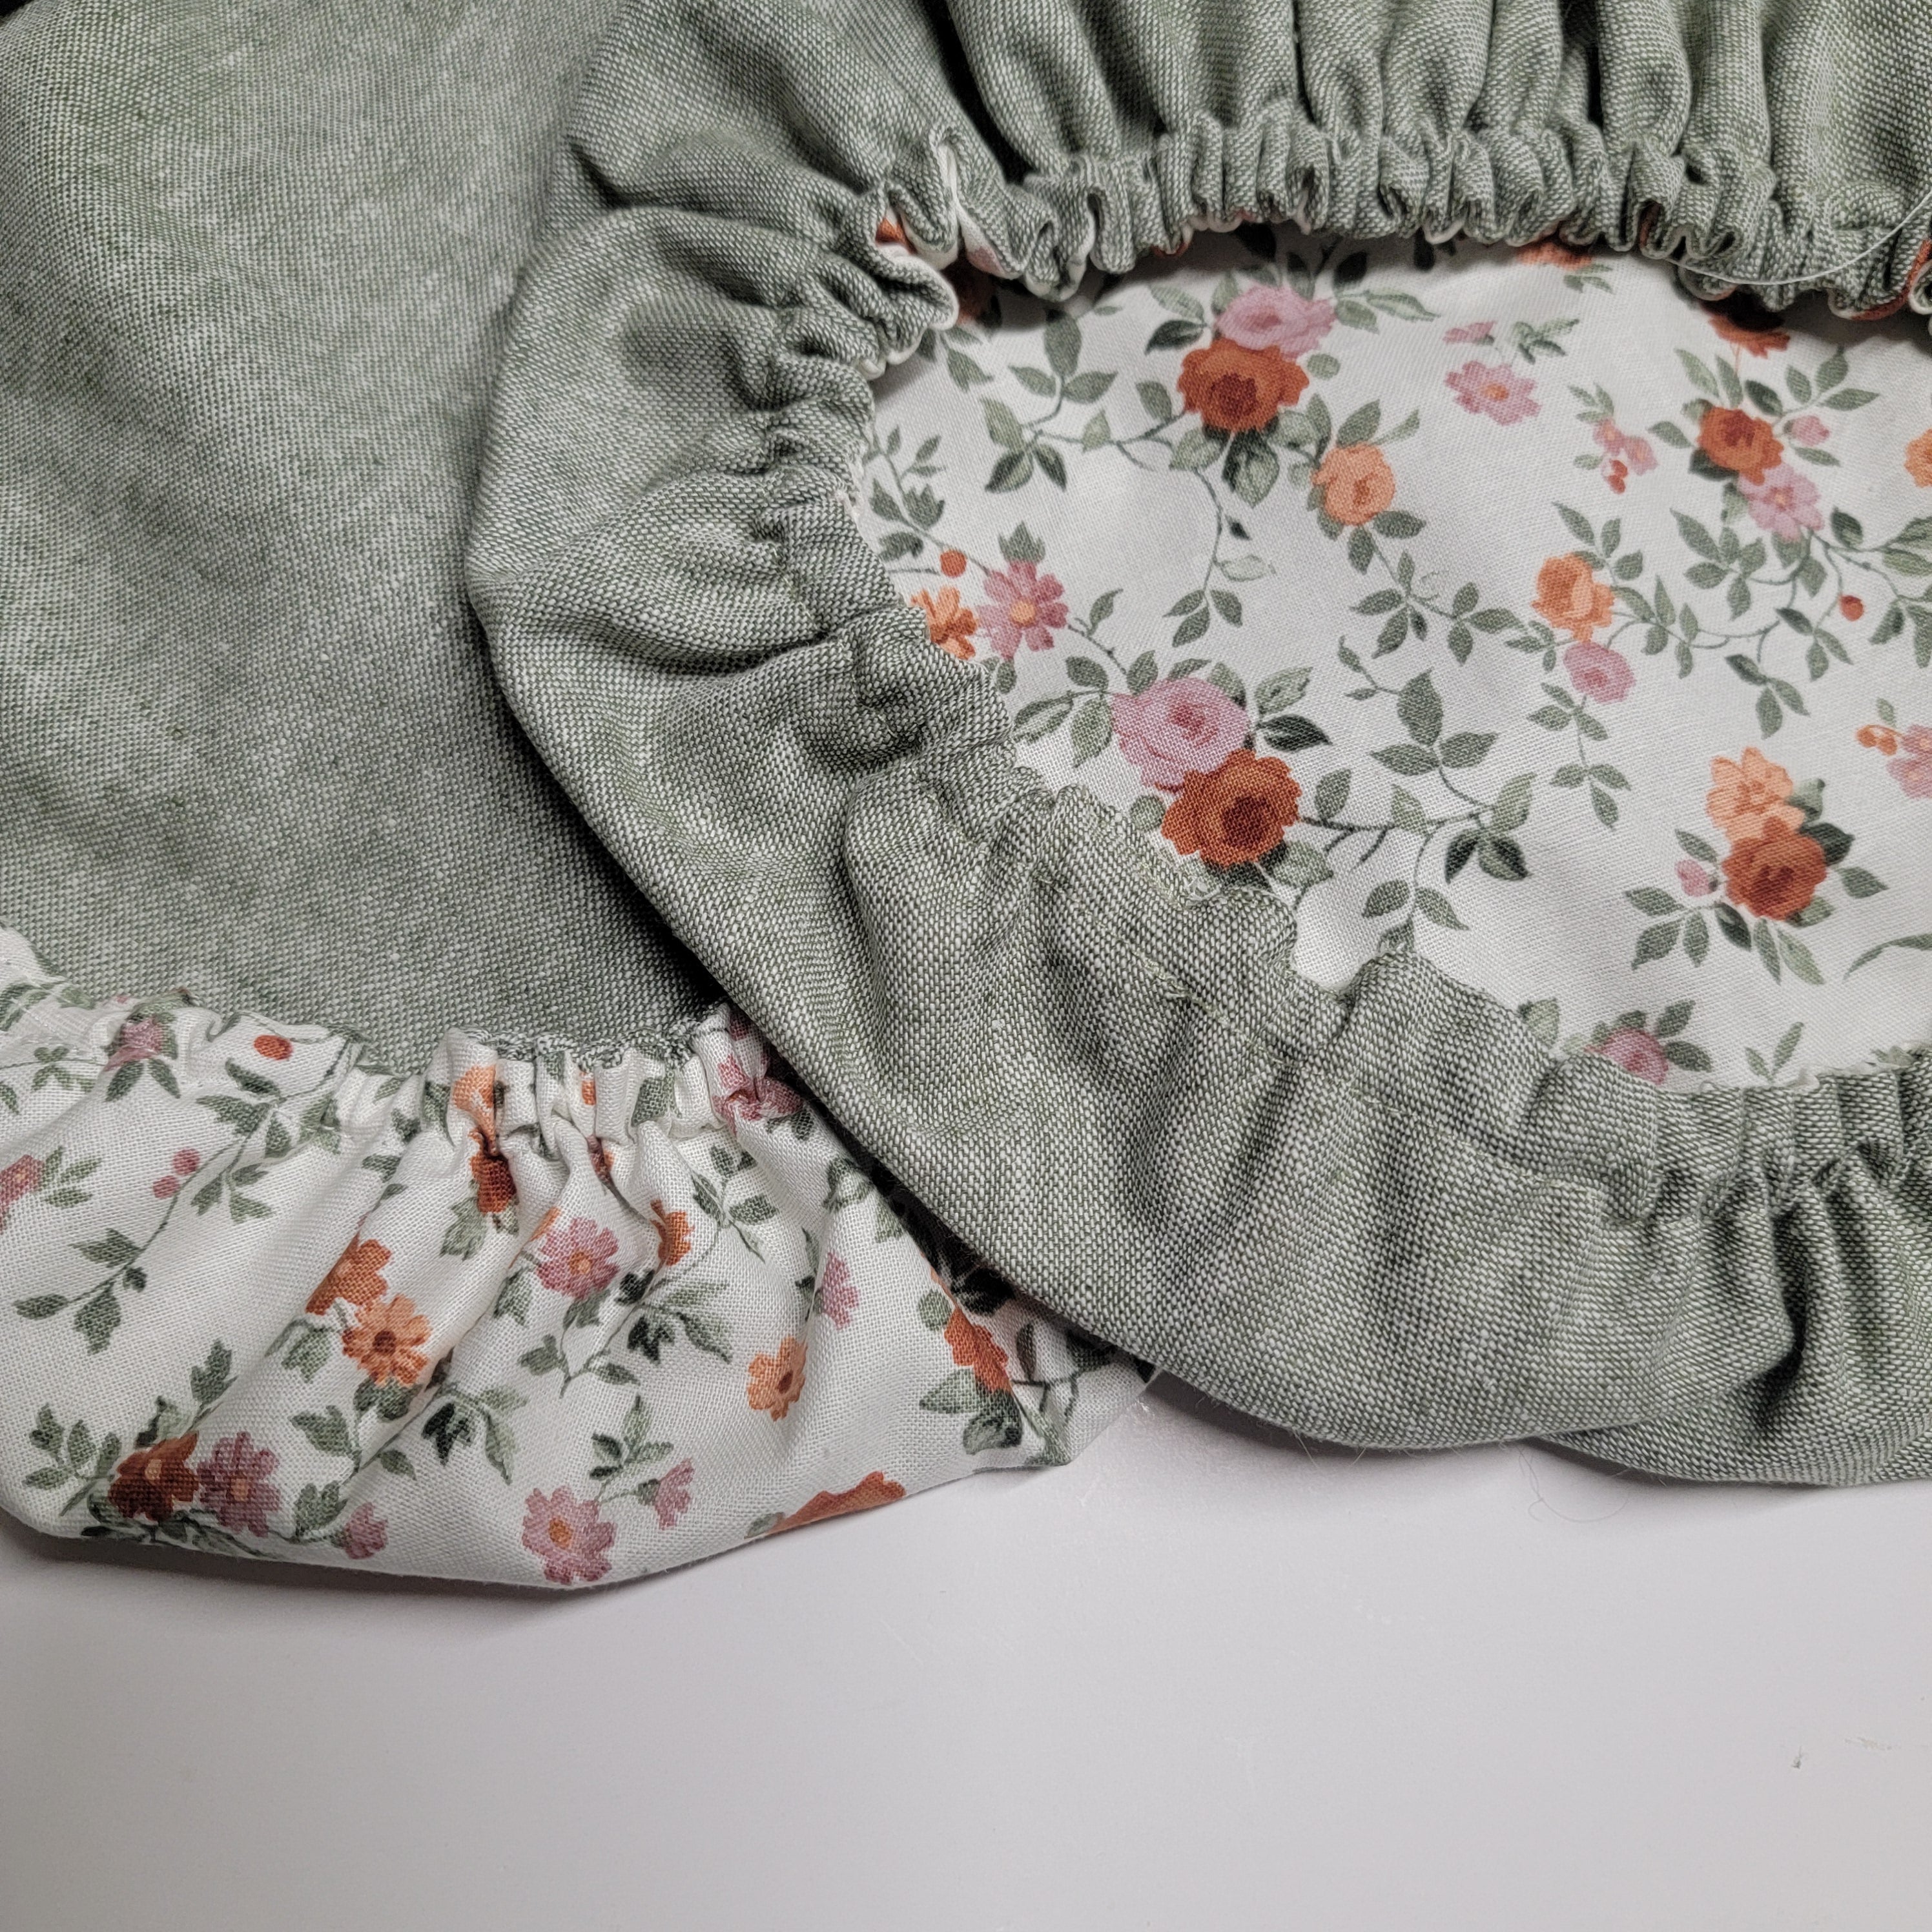 Granny's Bowl Covers